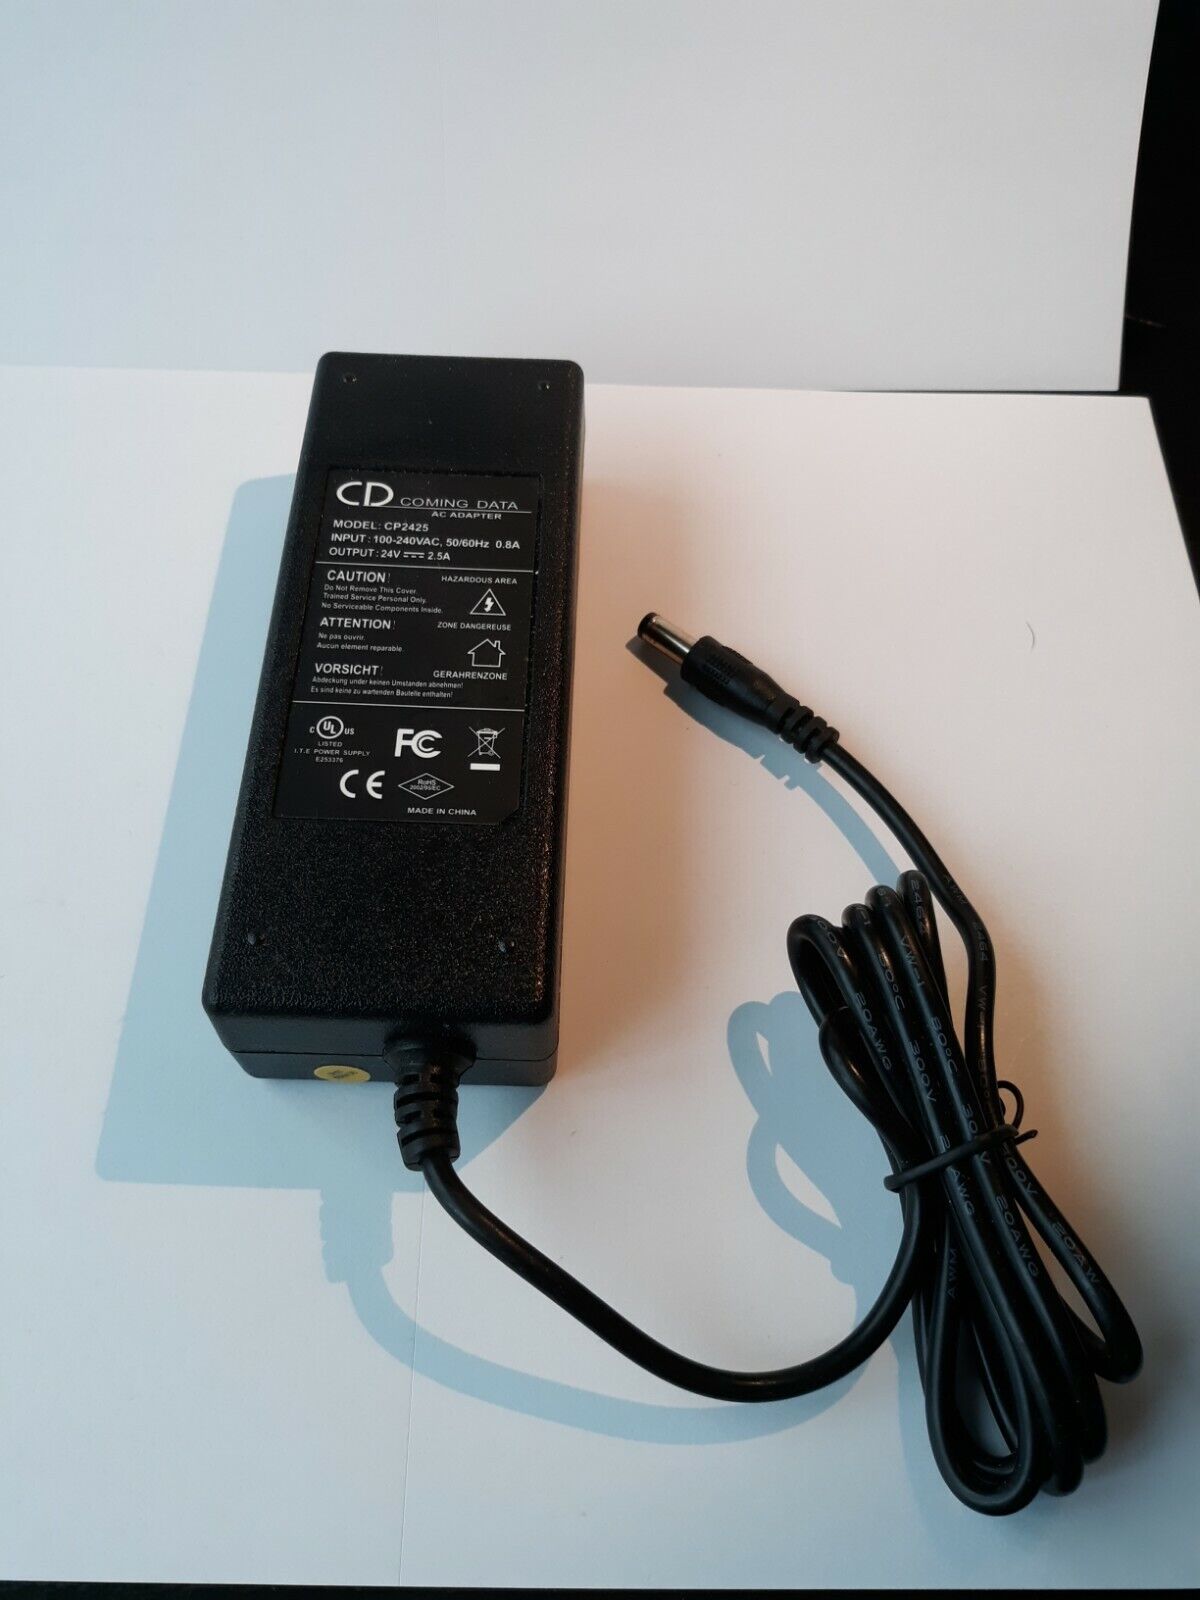 AC Adapter CD Coming Data, model:CP2425 24VDC, 2.5A Brand: Coming Data Type: AC/DC Adapter Color: Black Compatible